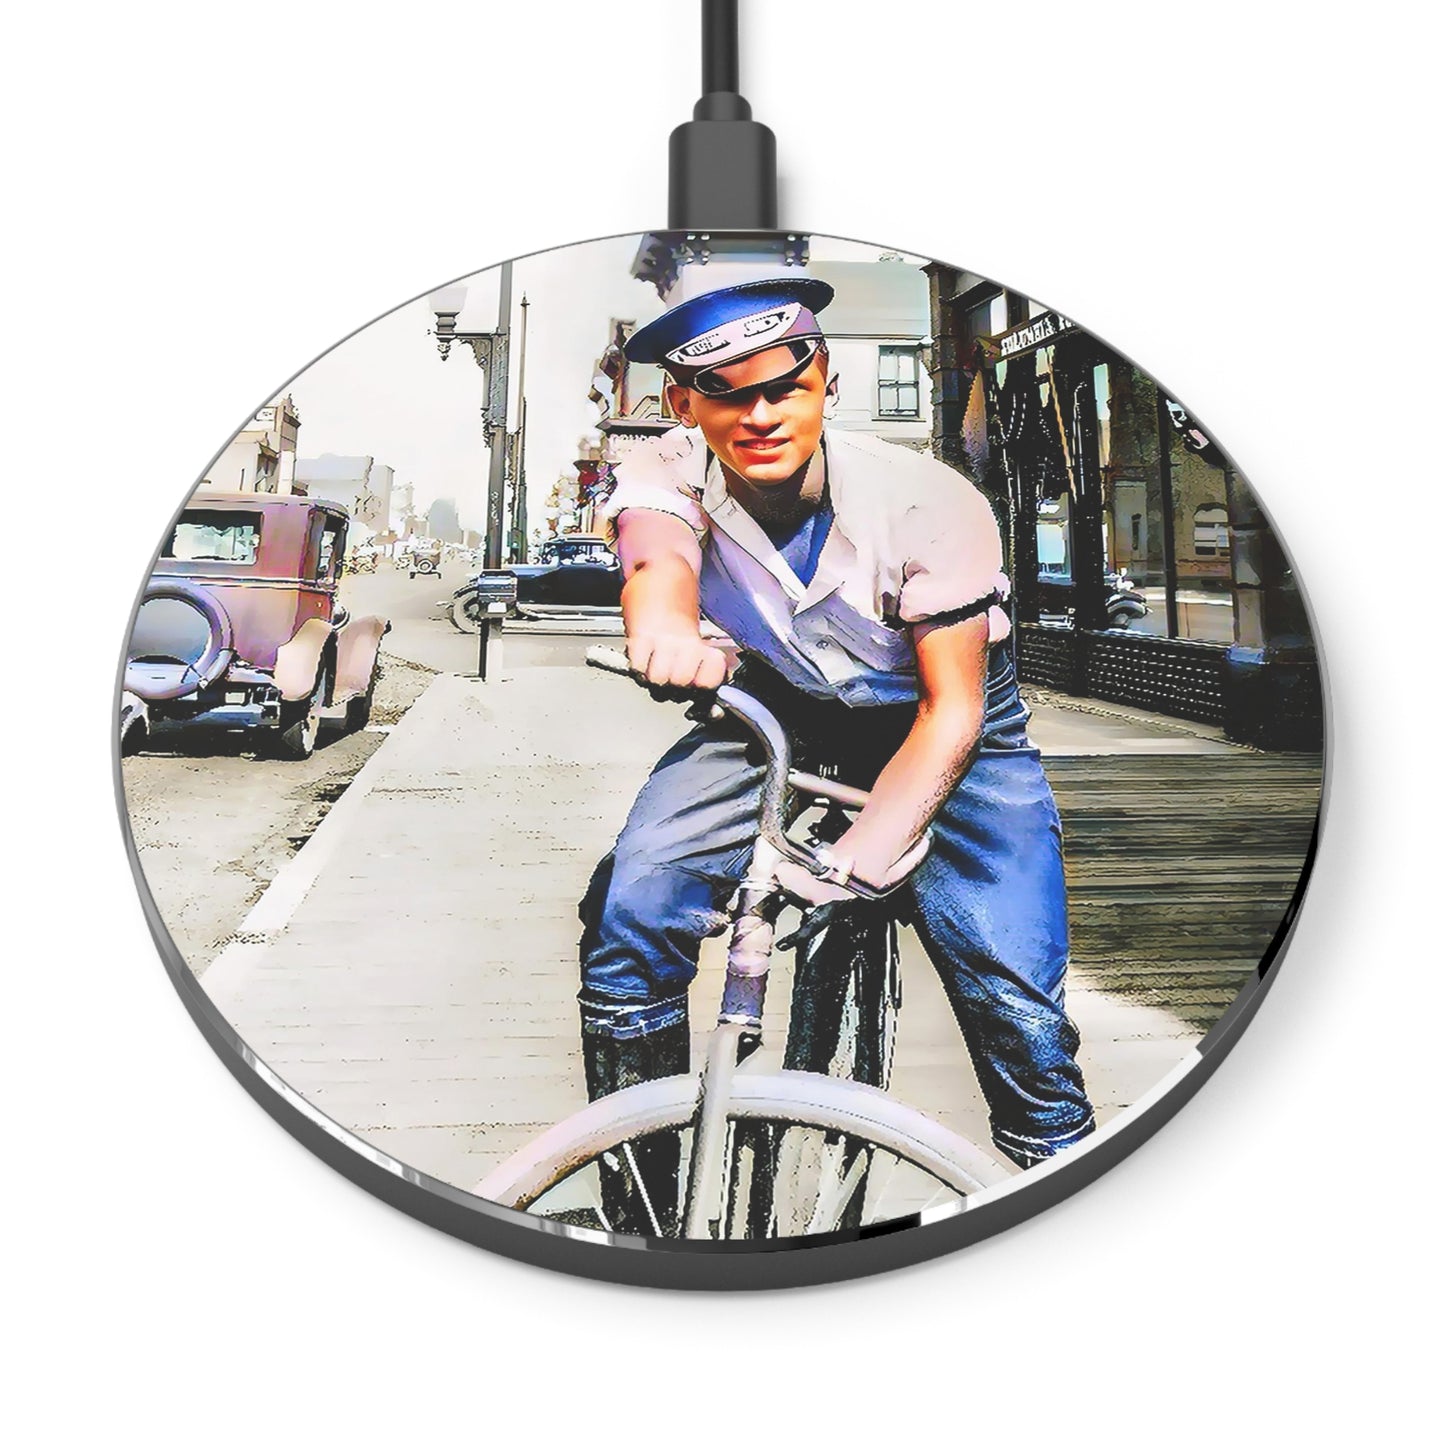 celibataire 031 | Wireless Charger Vintage Bike Bicyclist Bicycle Man Male Old Car Cityscape Gay